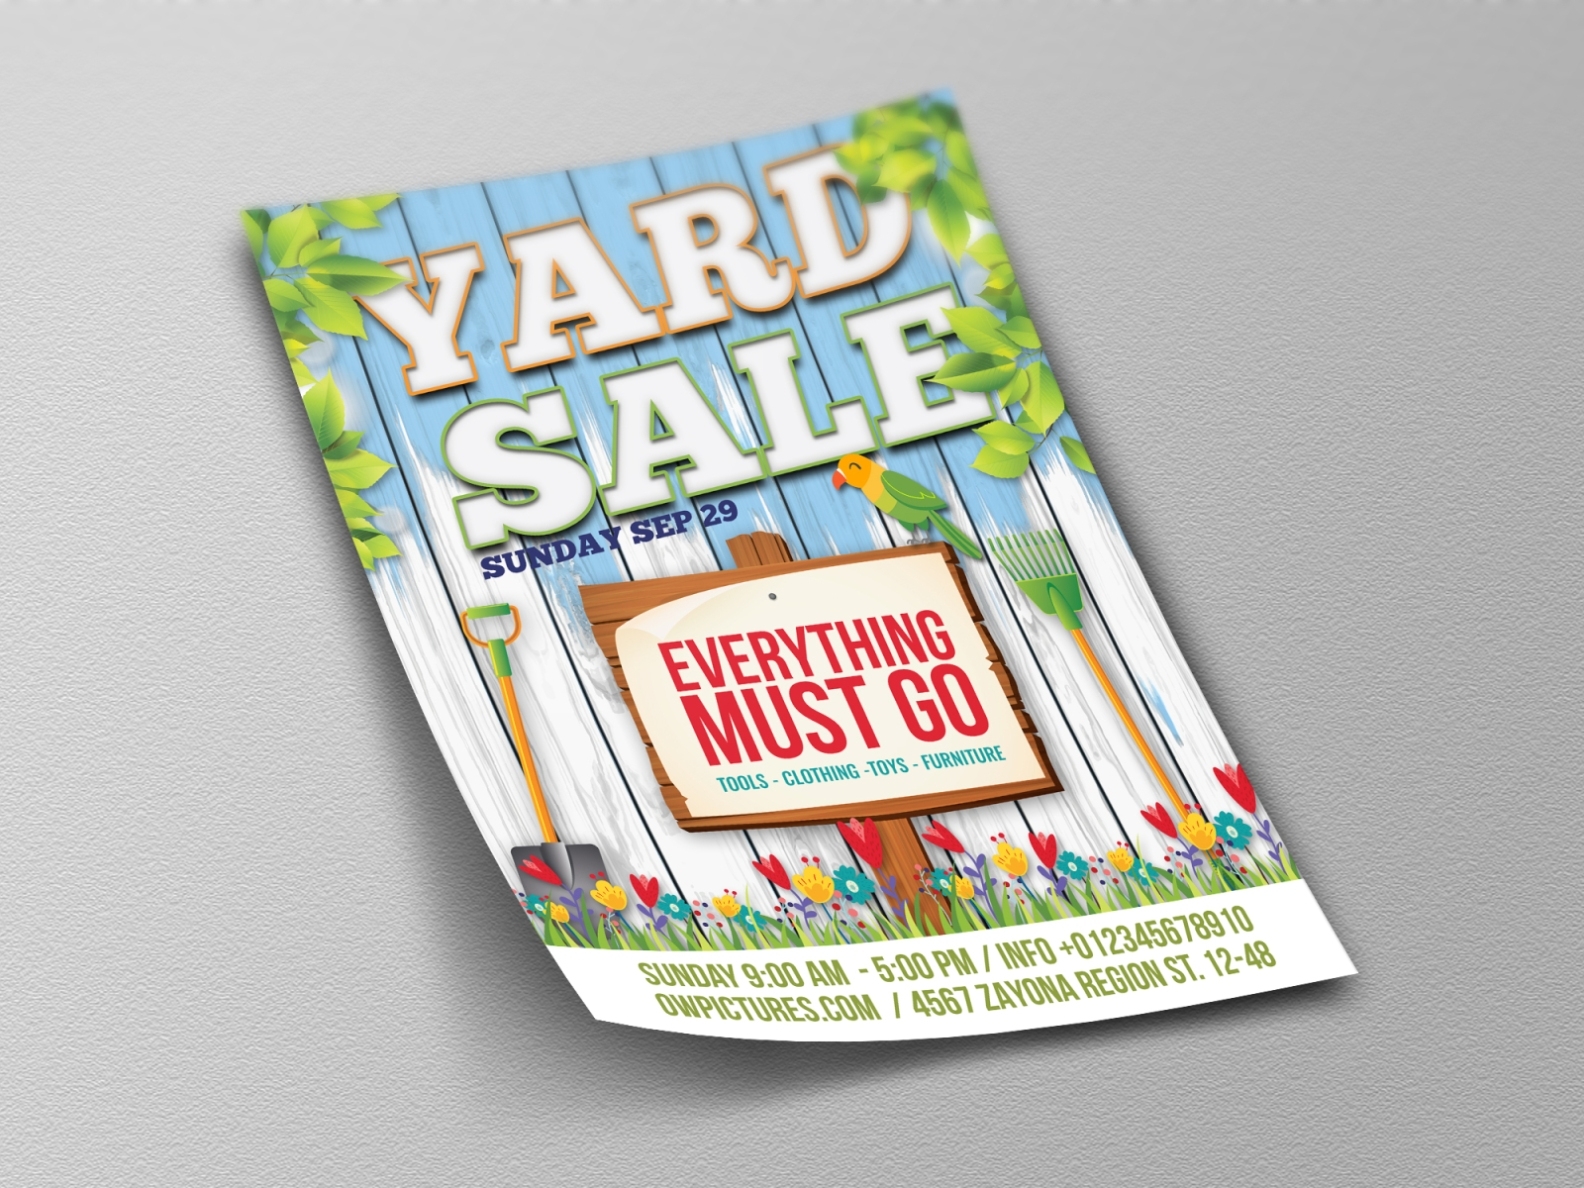 Yard Sale – Garage Sales Flyer Template By Owpictures On Dribbble Intended For Garage Sale Flyer Template